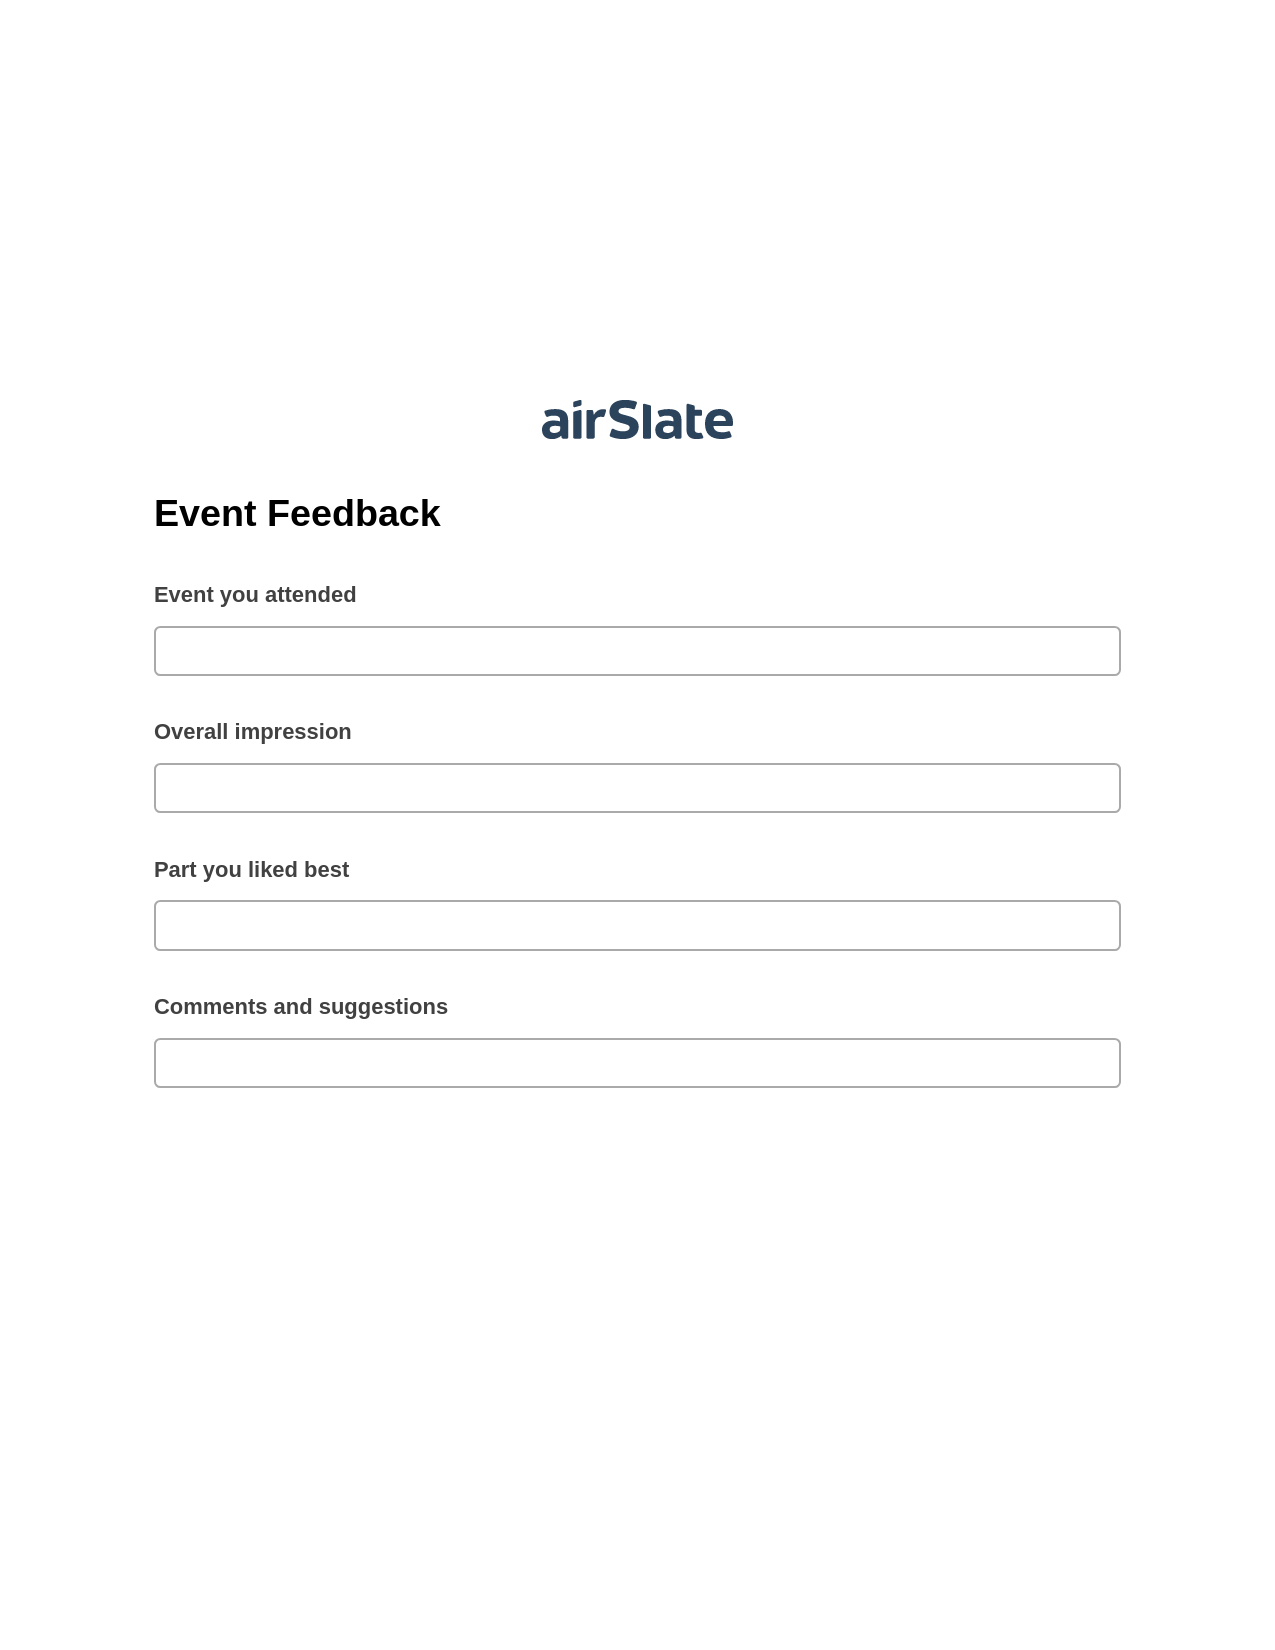 Event Feedback Pre-fill from Office 365 Excel Bot, Lock the slate bot, Export to Smartsheet